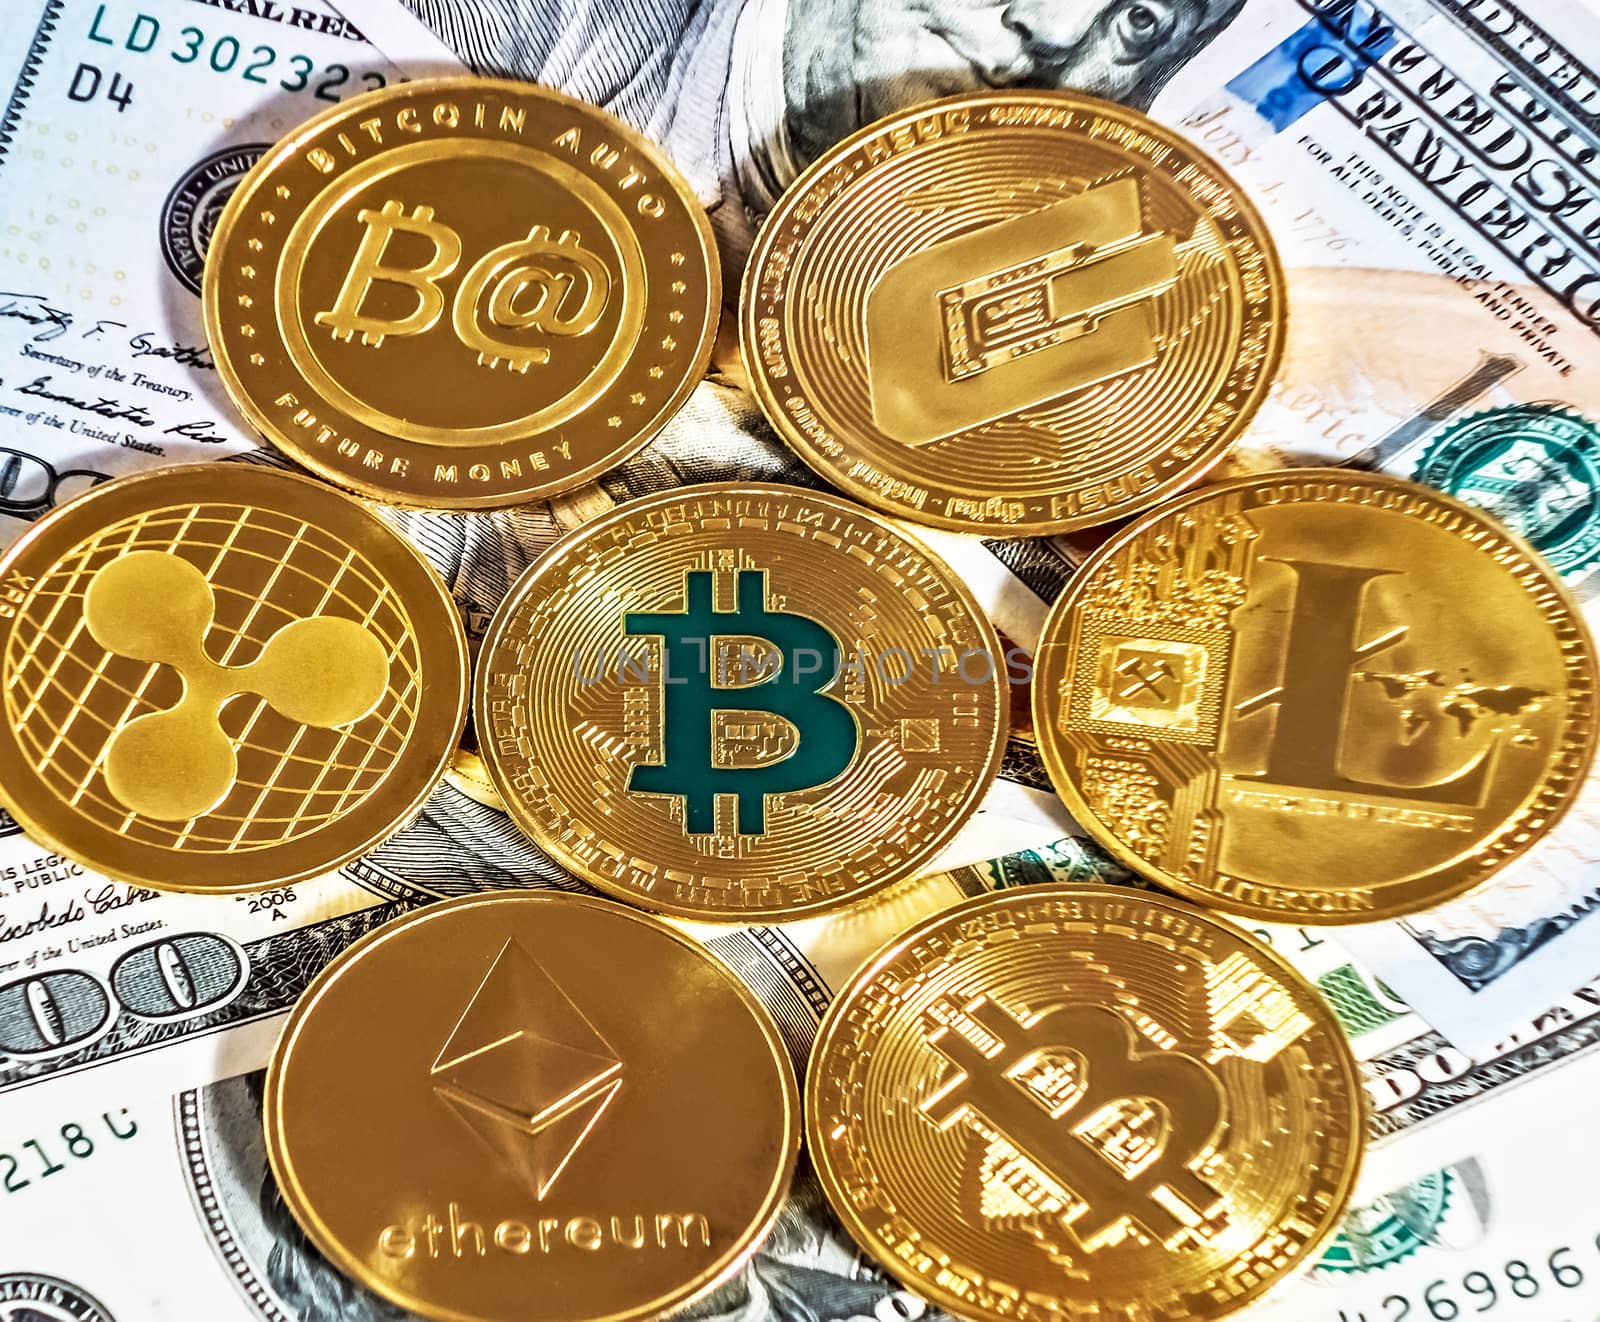 Gold bitcoin coin one hundred dollars bills banknotes. Blockchain technology Virtual digital currency. Crypto currency money exchange for trade. Physical Coin Cryptocurrency BTC Investing.